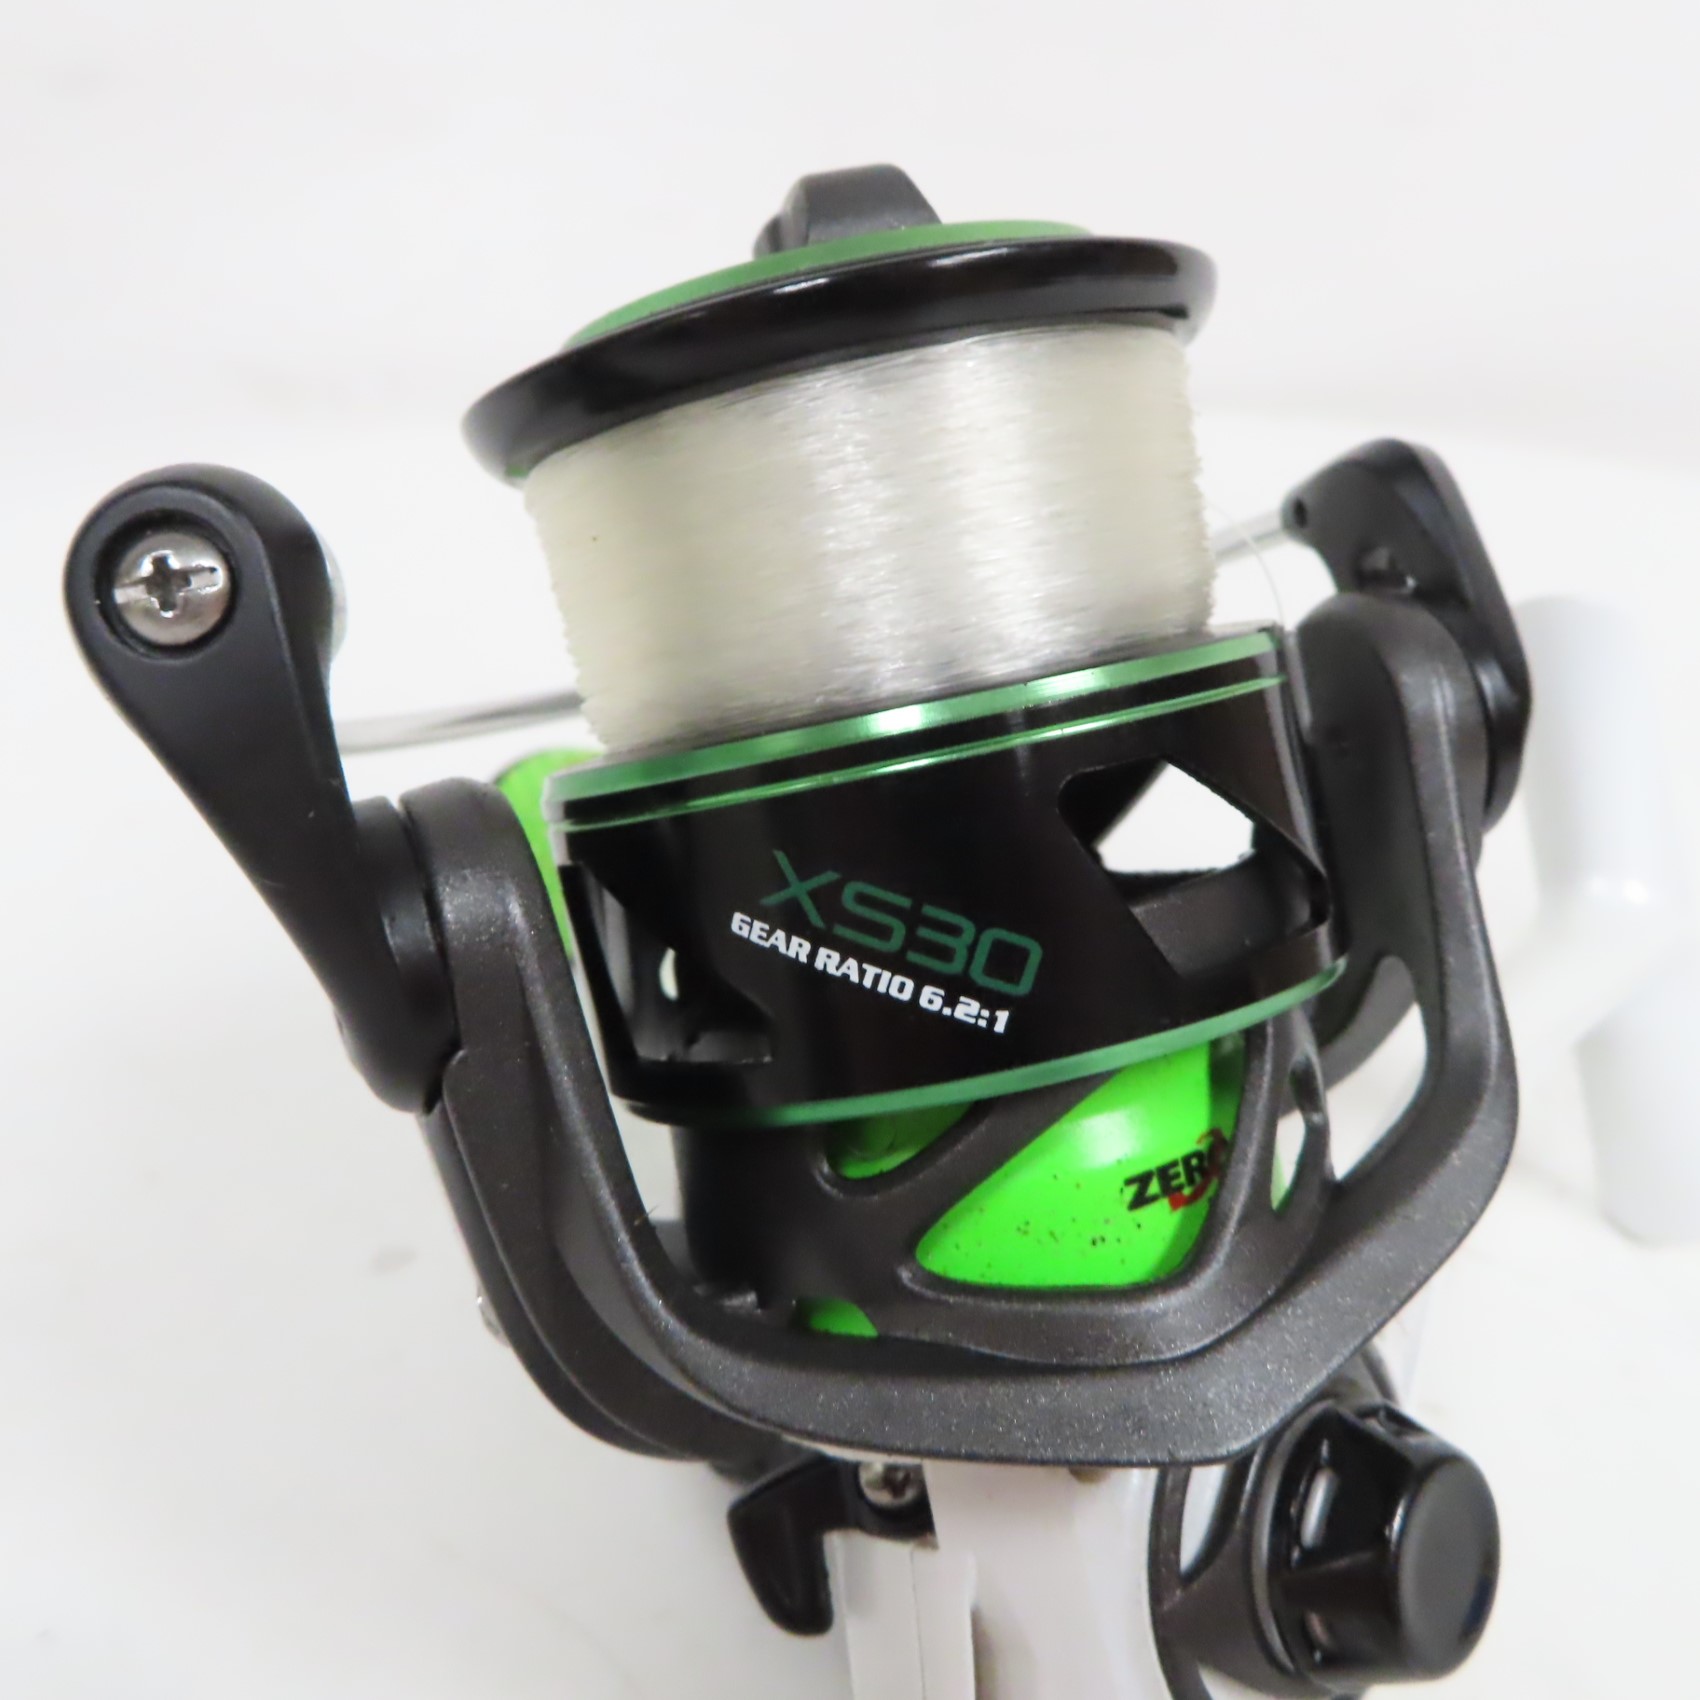 Lews X530 6.2:1 Right-Hand Xfinity Speed Spin Spinning Fishing Reel